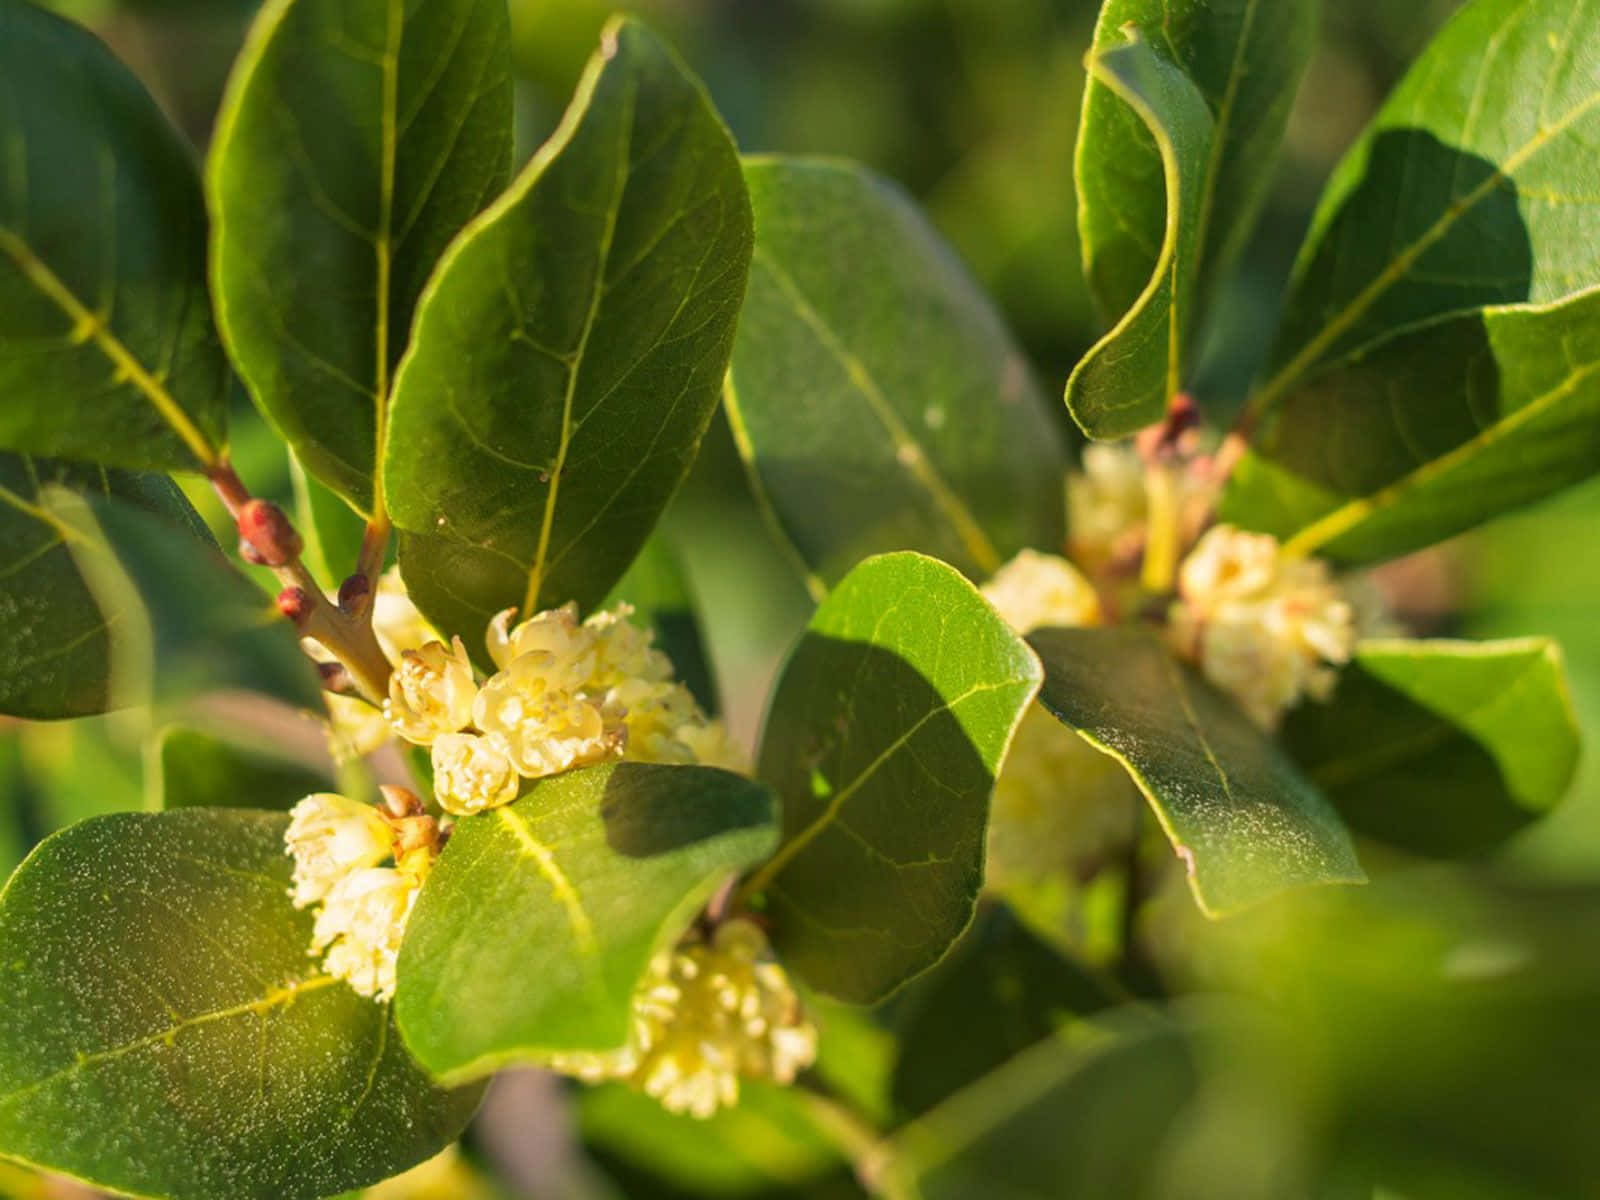 A Close Up Of A Leaf With Yellow Flowers